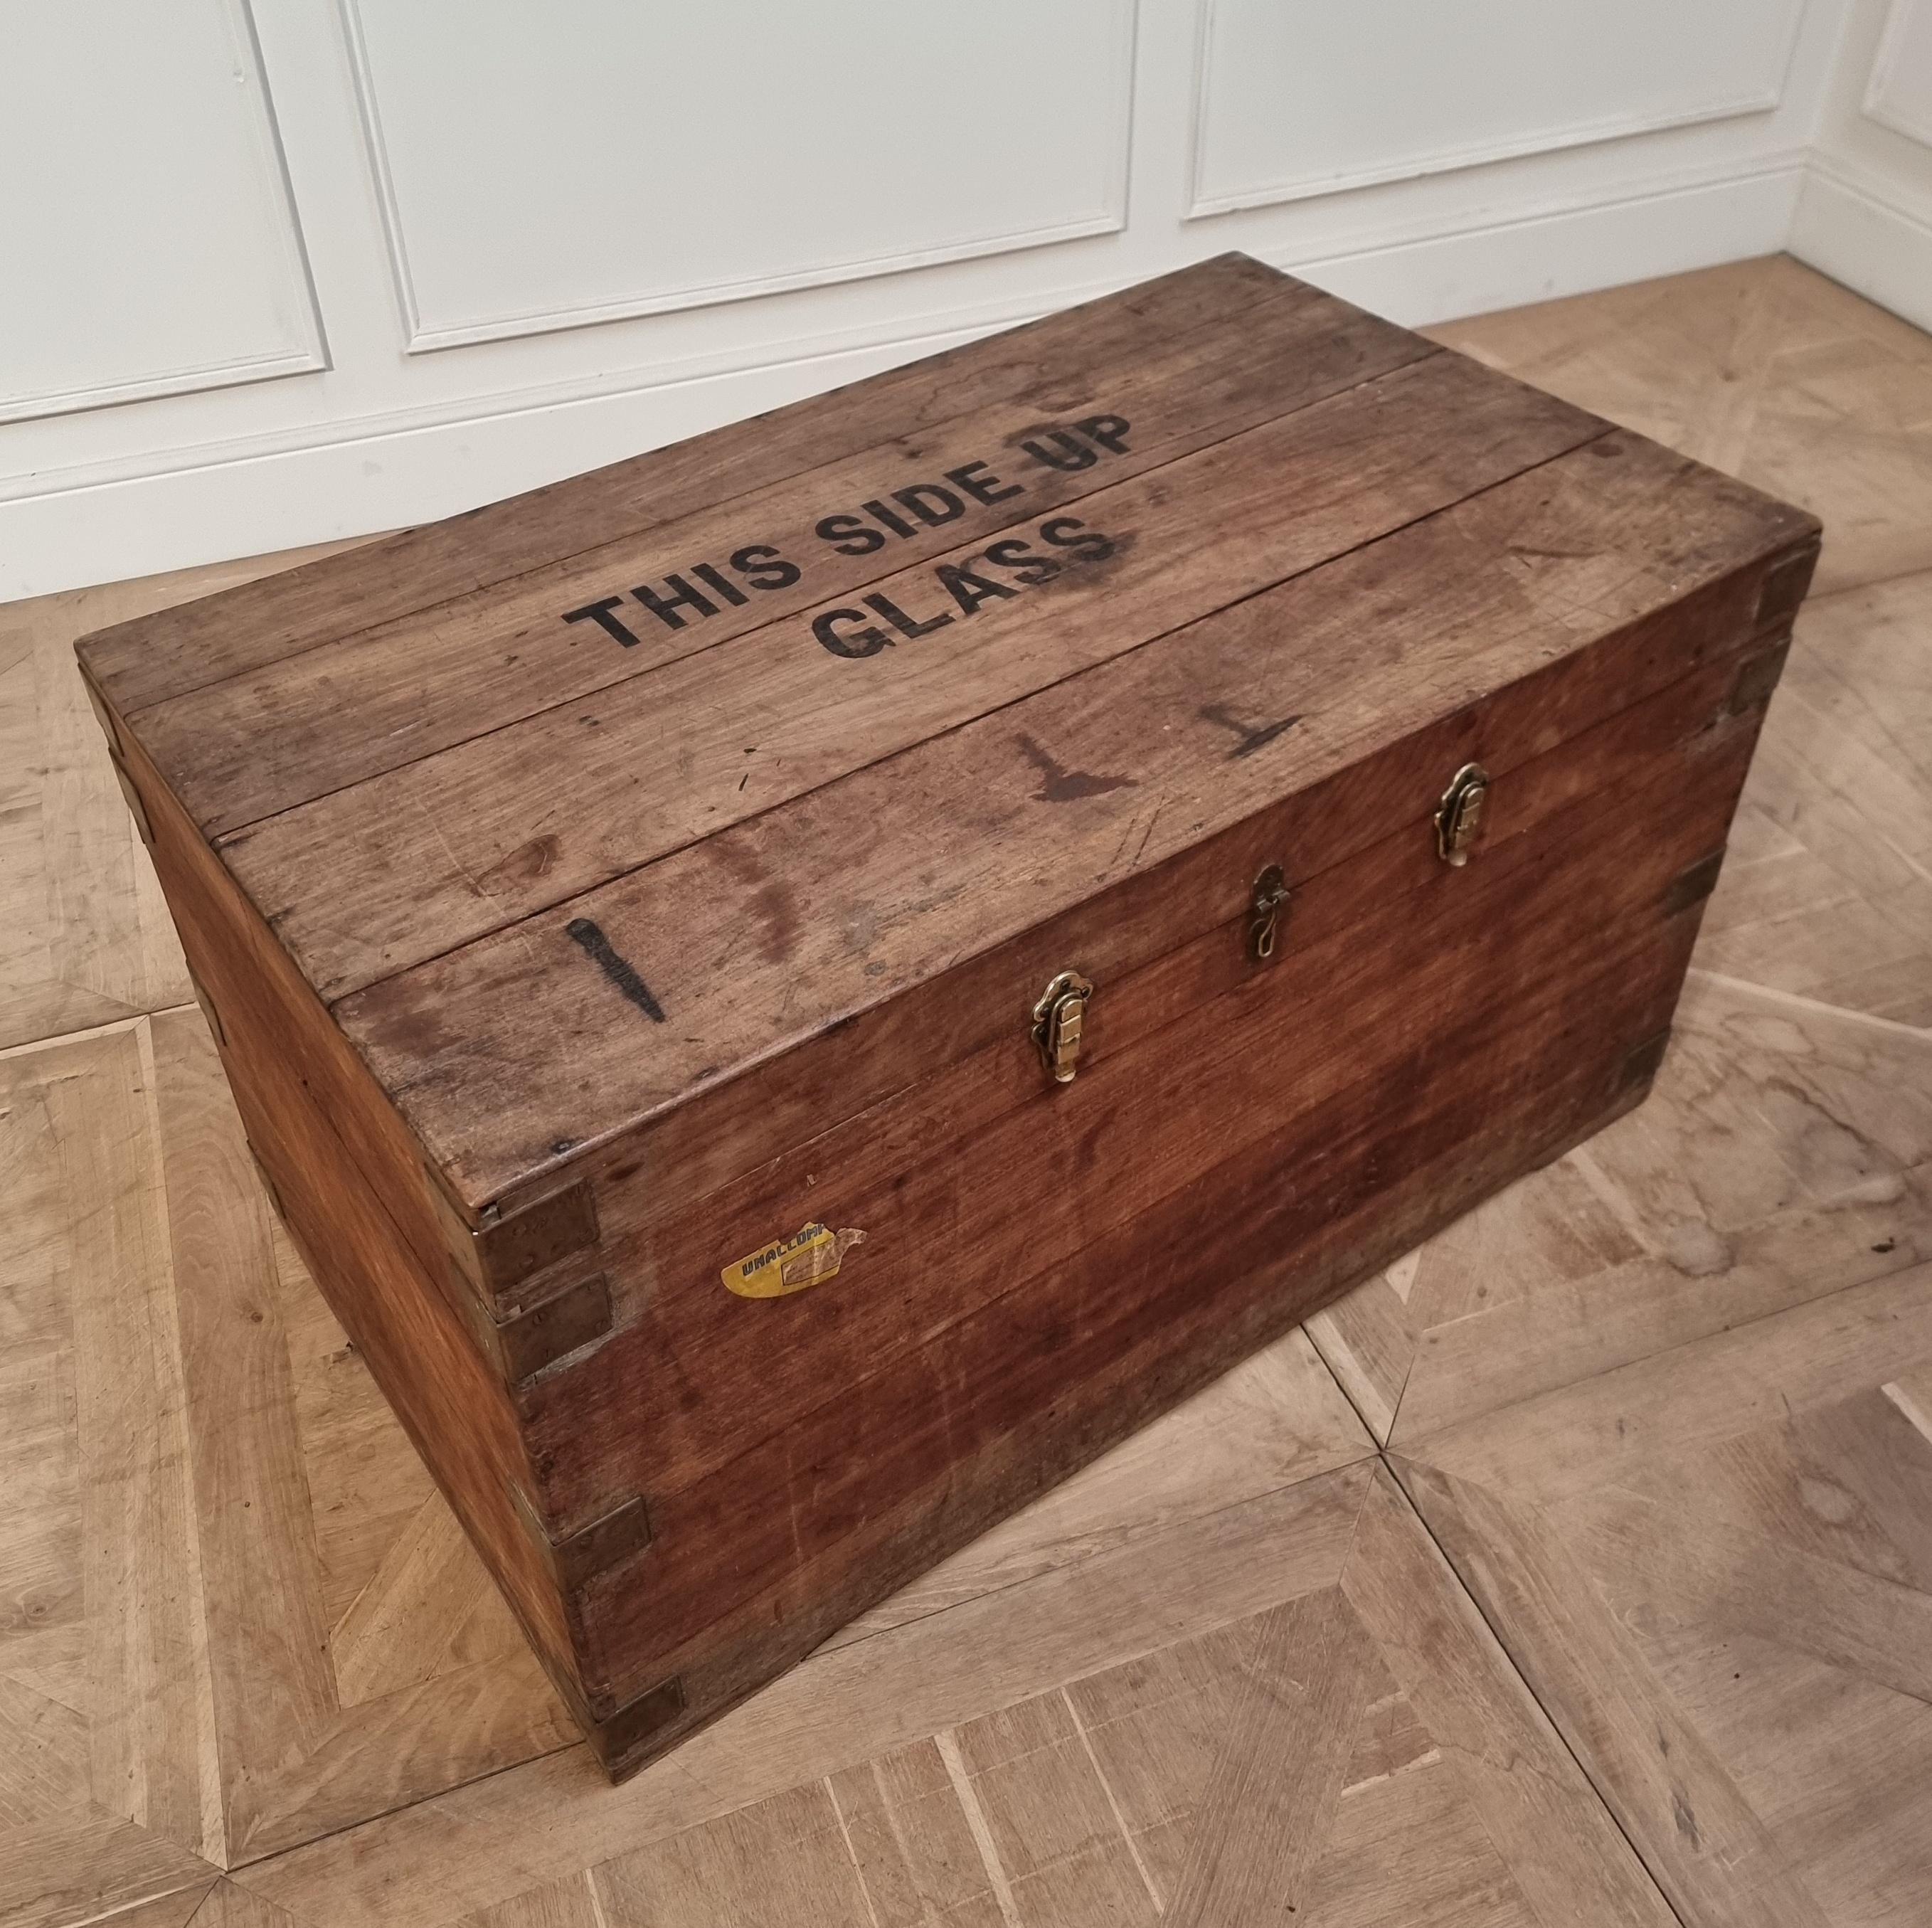 Large early 20th C antique camphor travel chest with original stamp. 1930.

Reference: 7660

Dimensions
45 inches (114 cms) wide
26 inches (66 cms) deep
25.5 inches (65 cms) high.